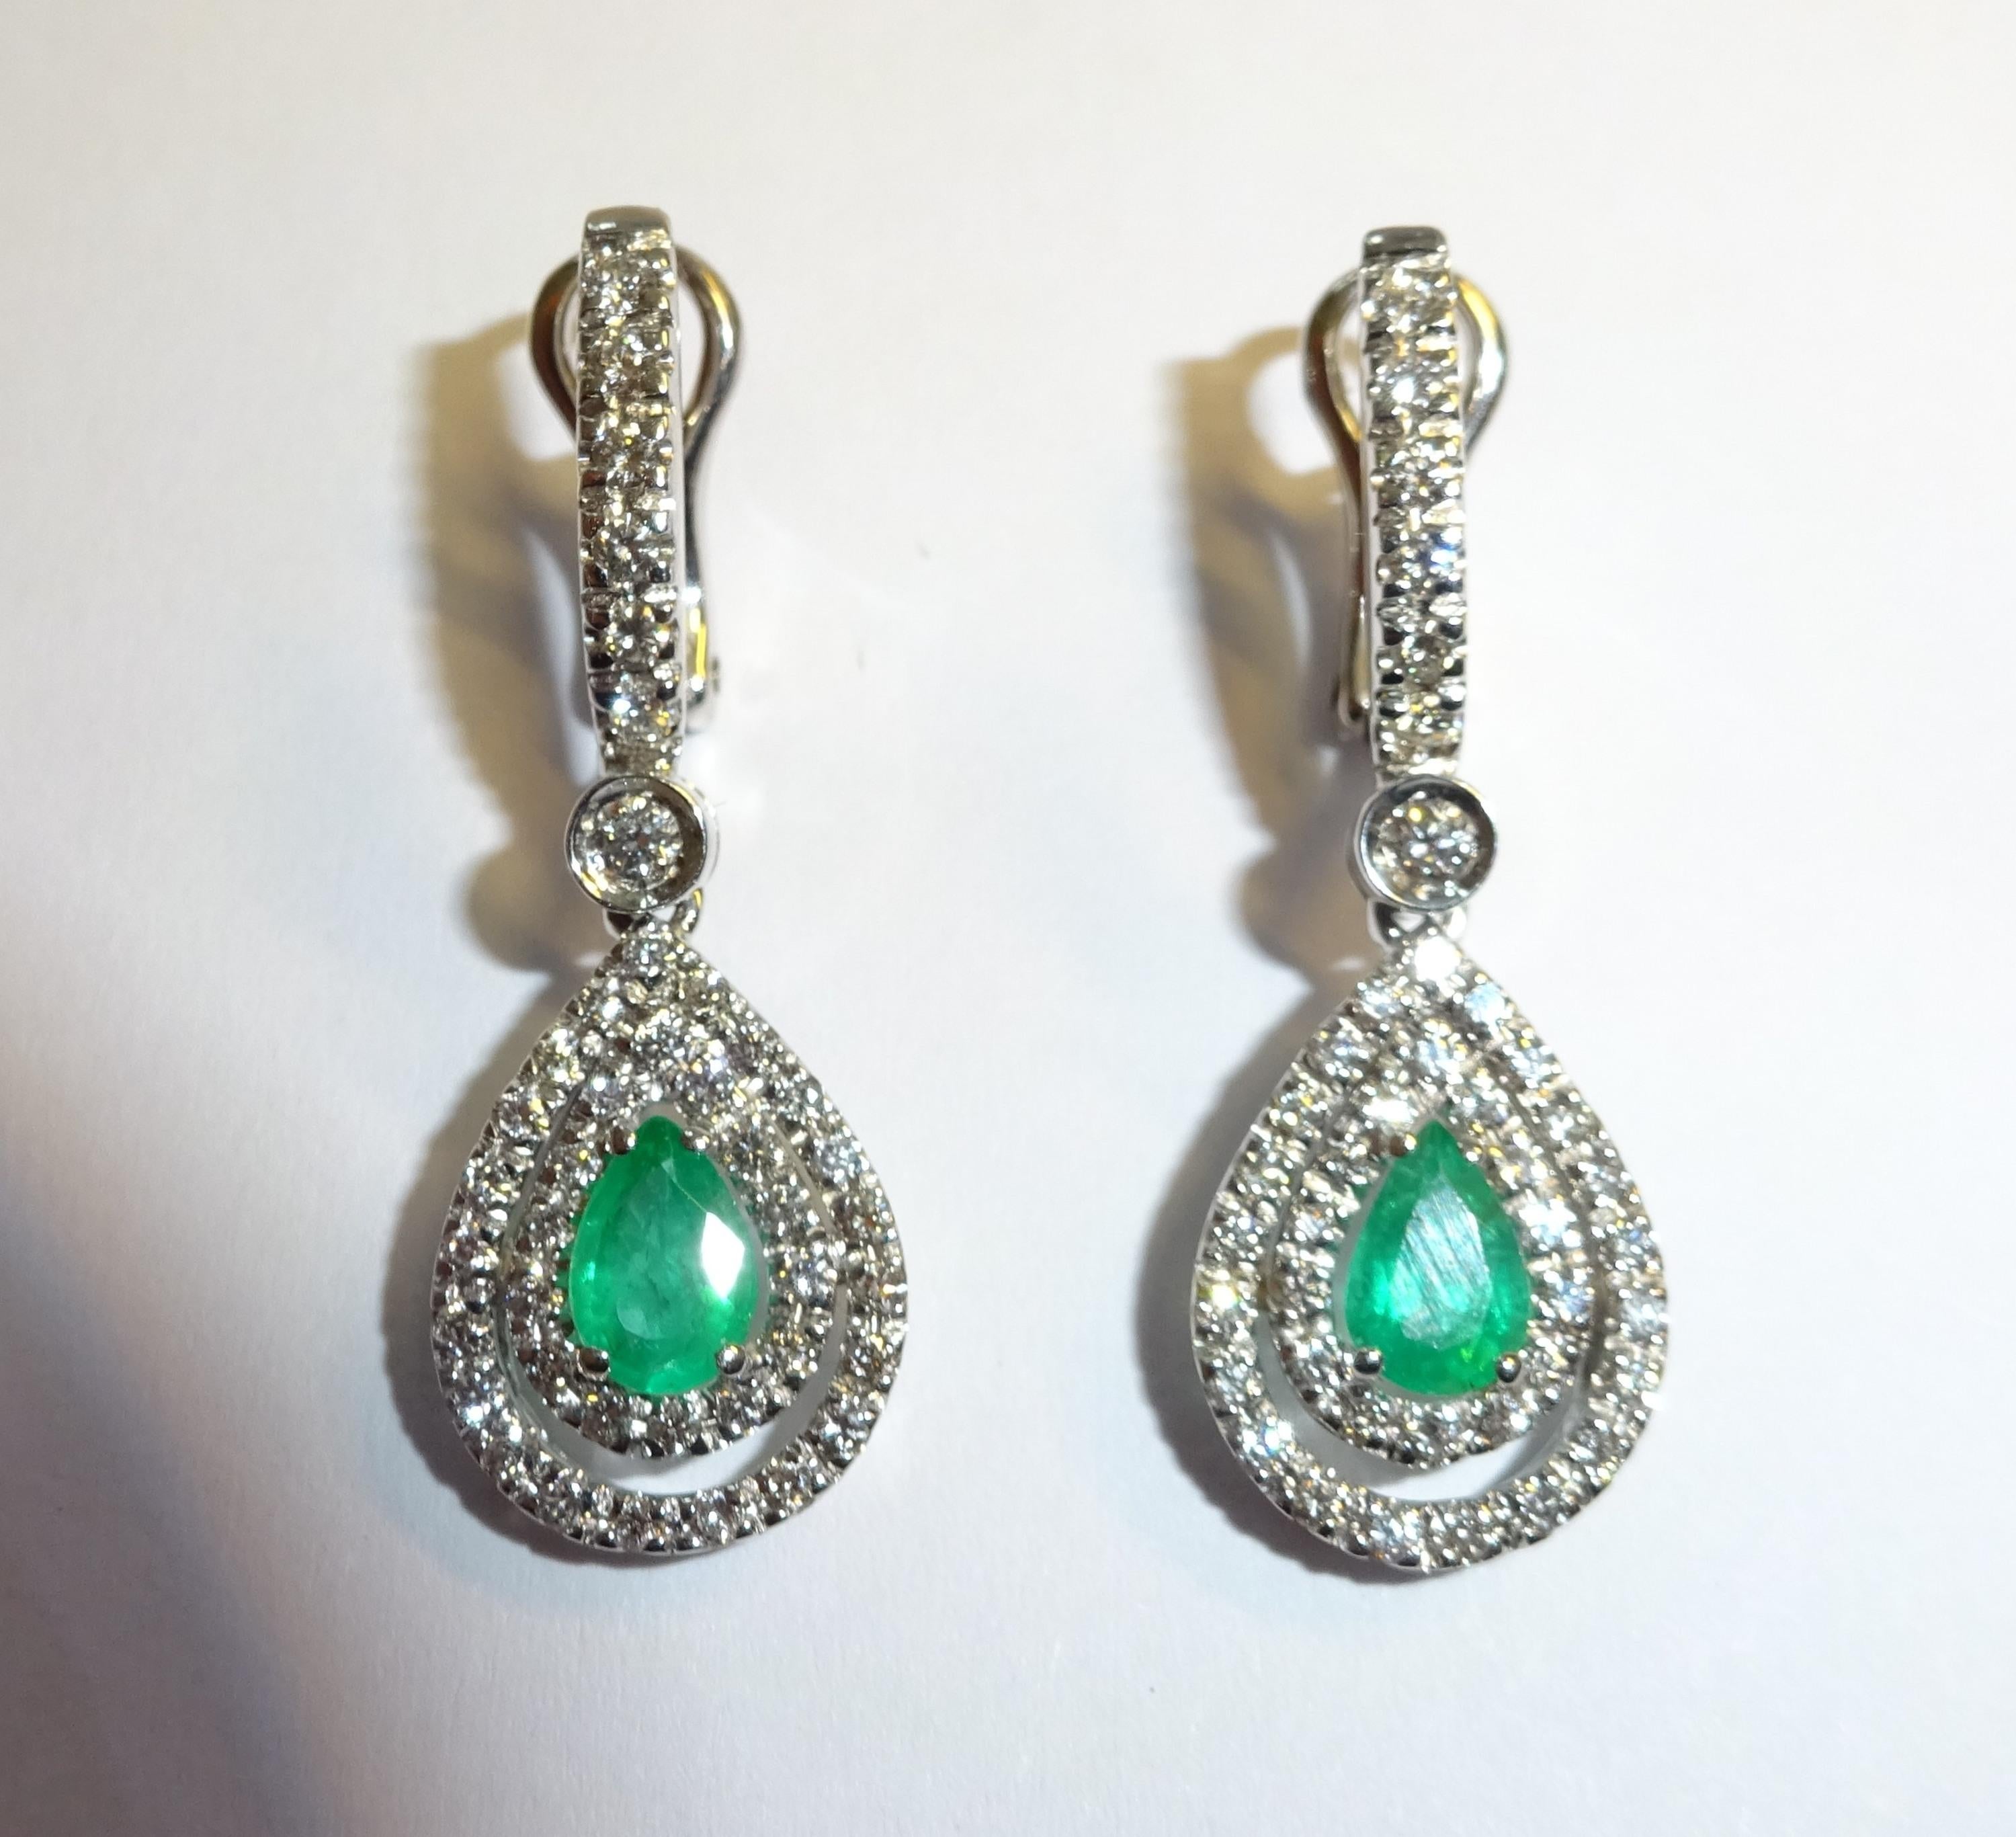 18 Karat White Gold Diamond and Emerald Dangle Earrings

84 Diamonds 0,75 Carat H SI
2 Emerald 0.73 Carat


Founded in 1974, Gianni Lazzaro is a family-owned jewelry company based out of Düsseldorf, Germany.
Although rooted in Germany, Gianni